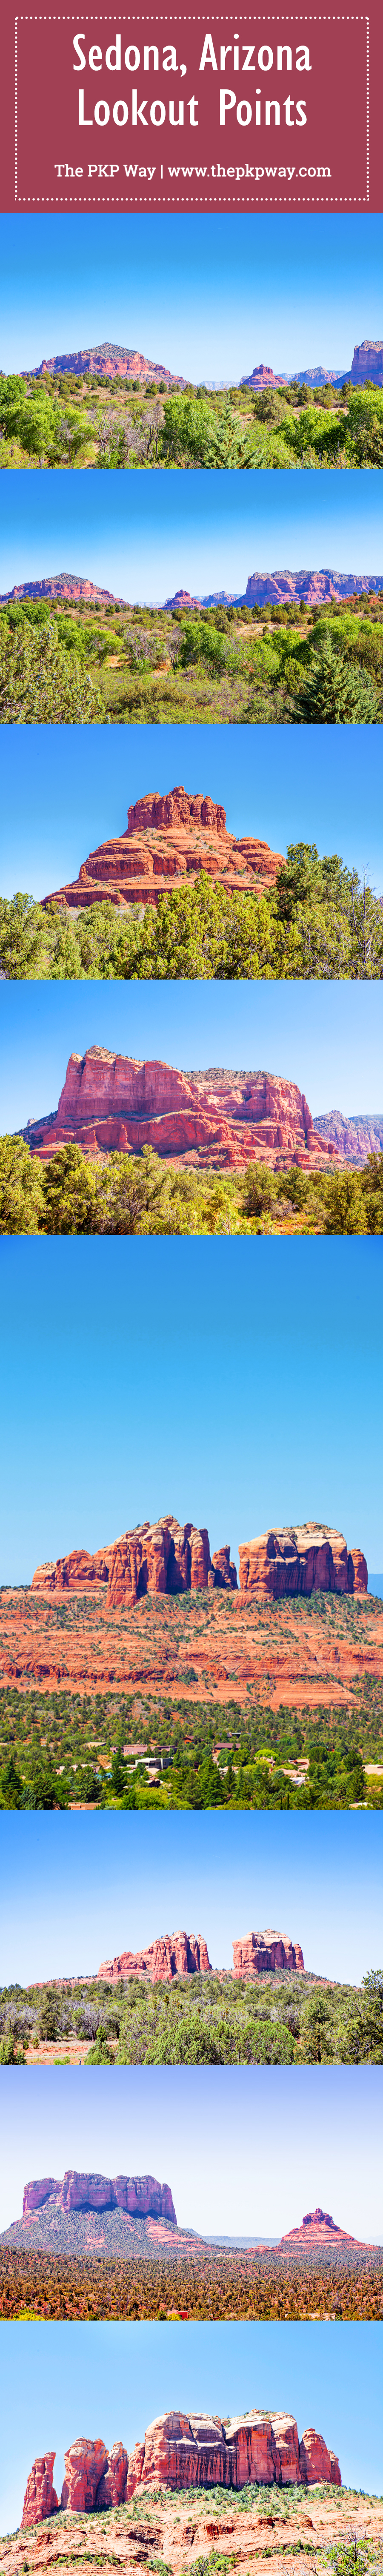 A day of Hiking in Sedona, Arizona - where to stop and which trails to hike